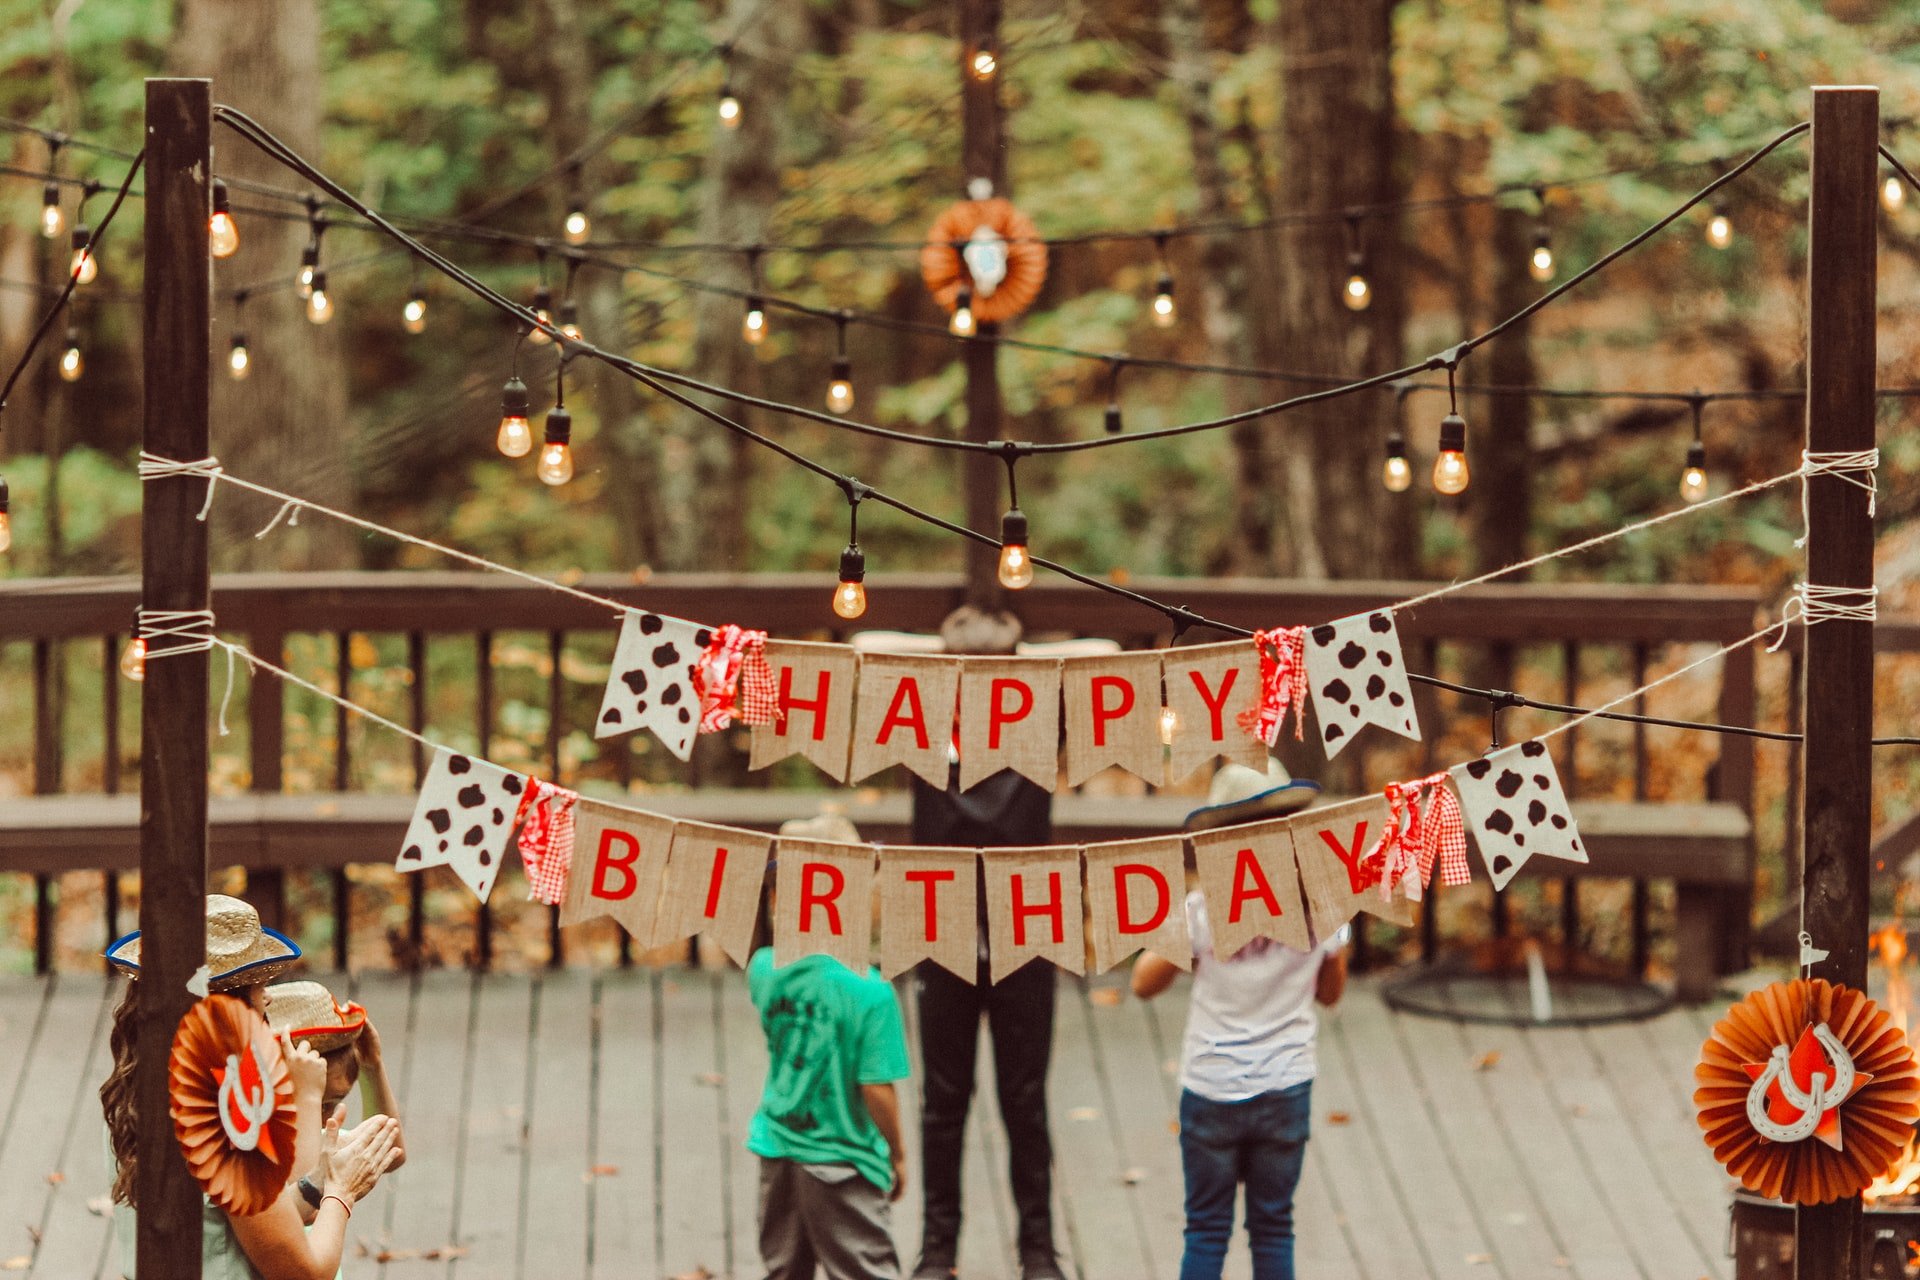 Evan never imagined that his birthday party would turn his life upside-down. | Source: Unsplash